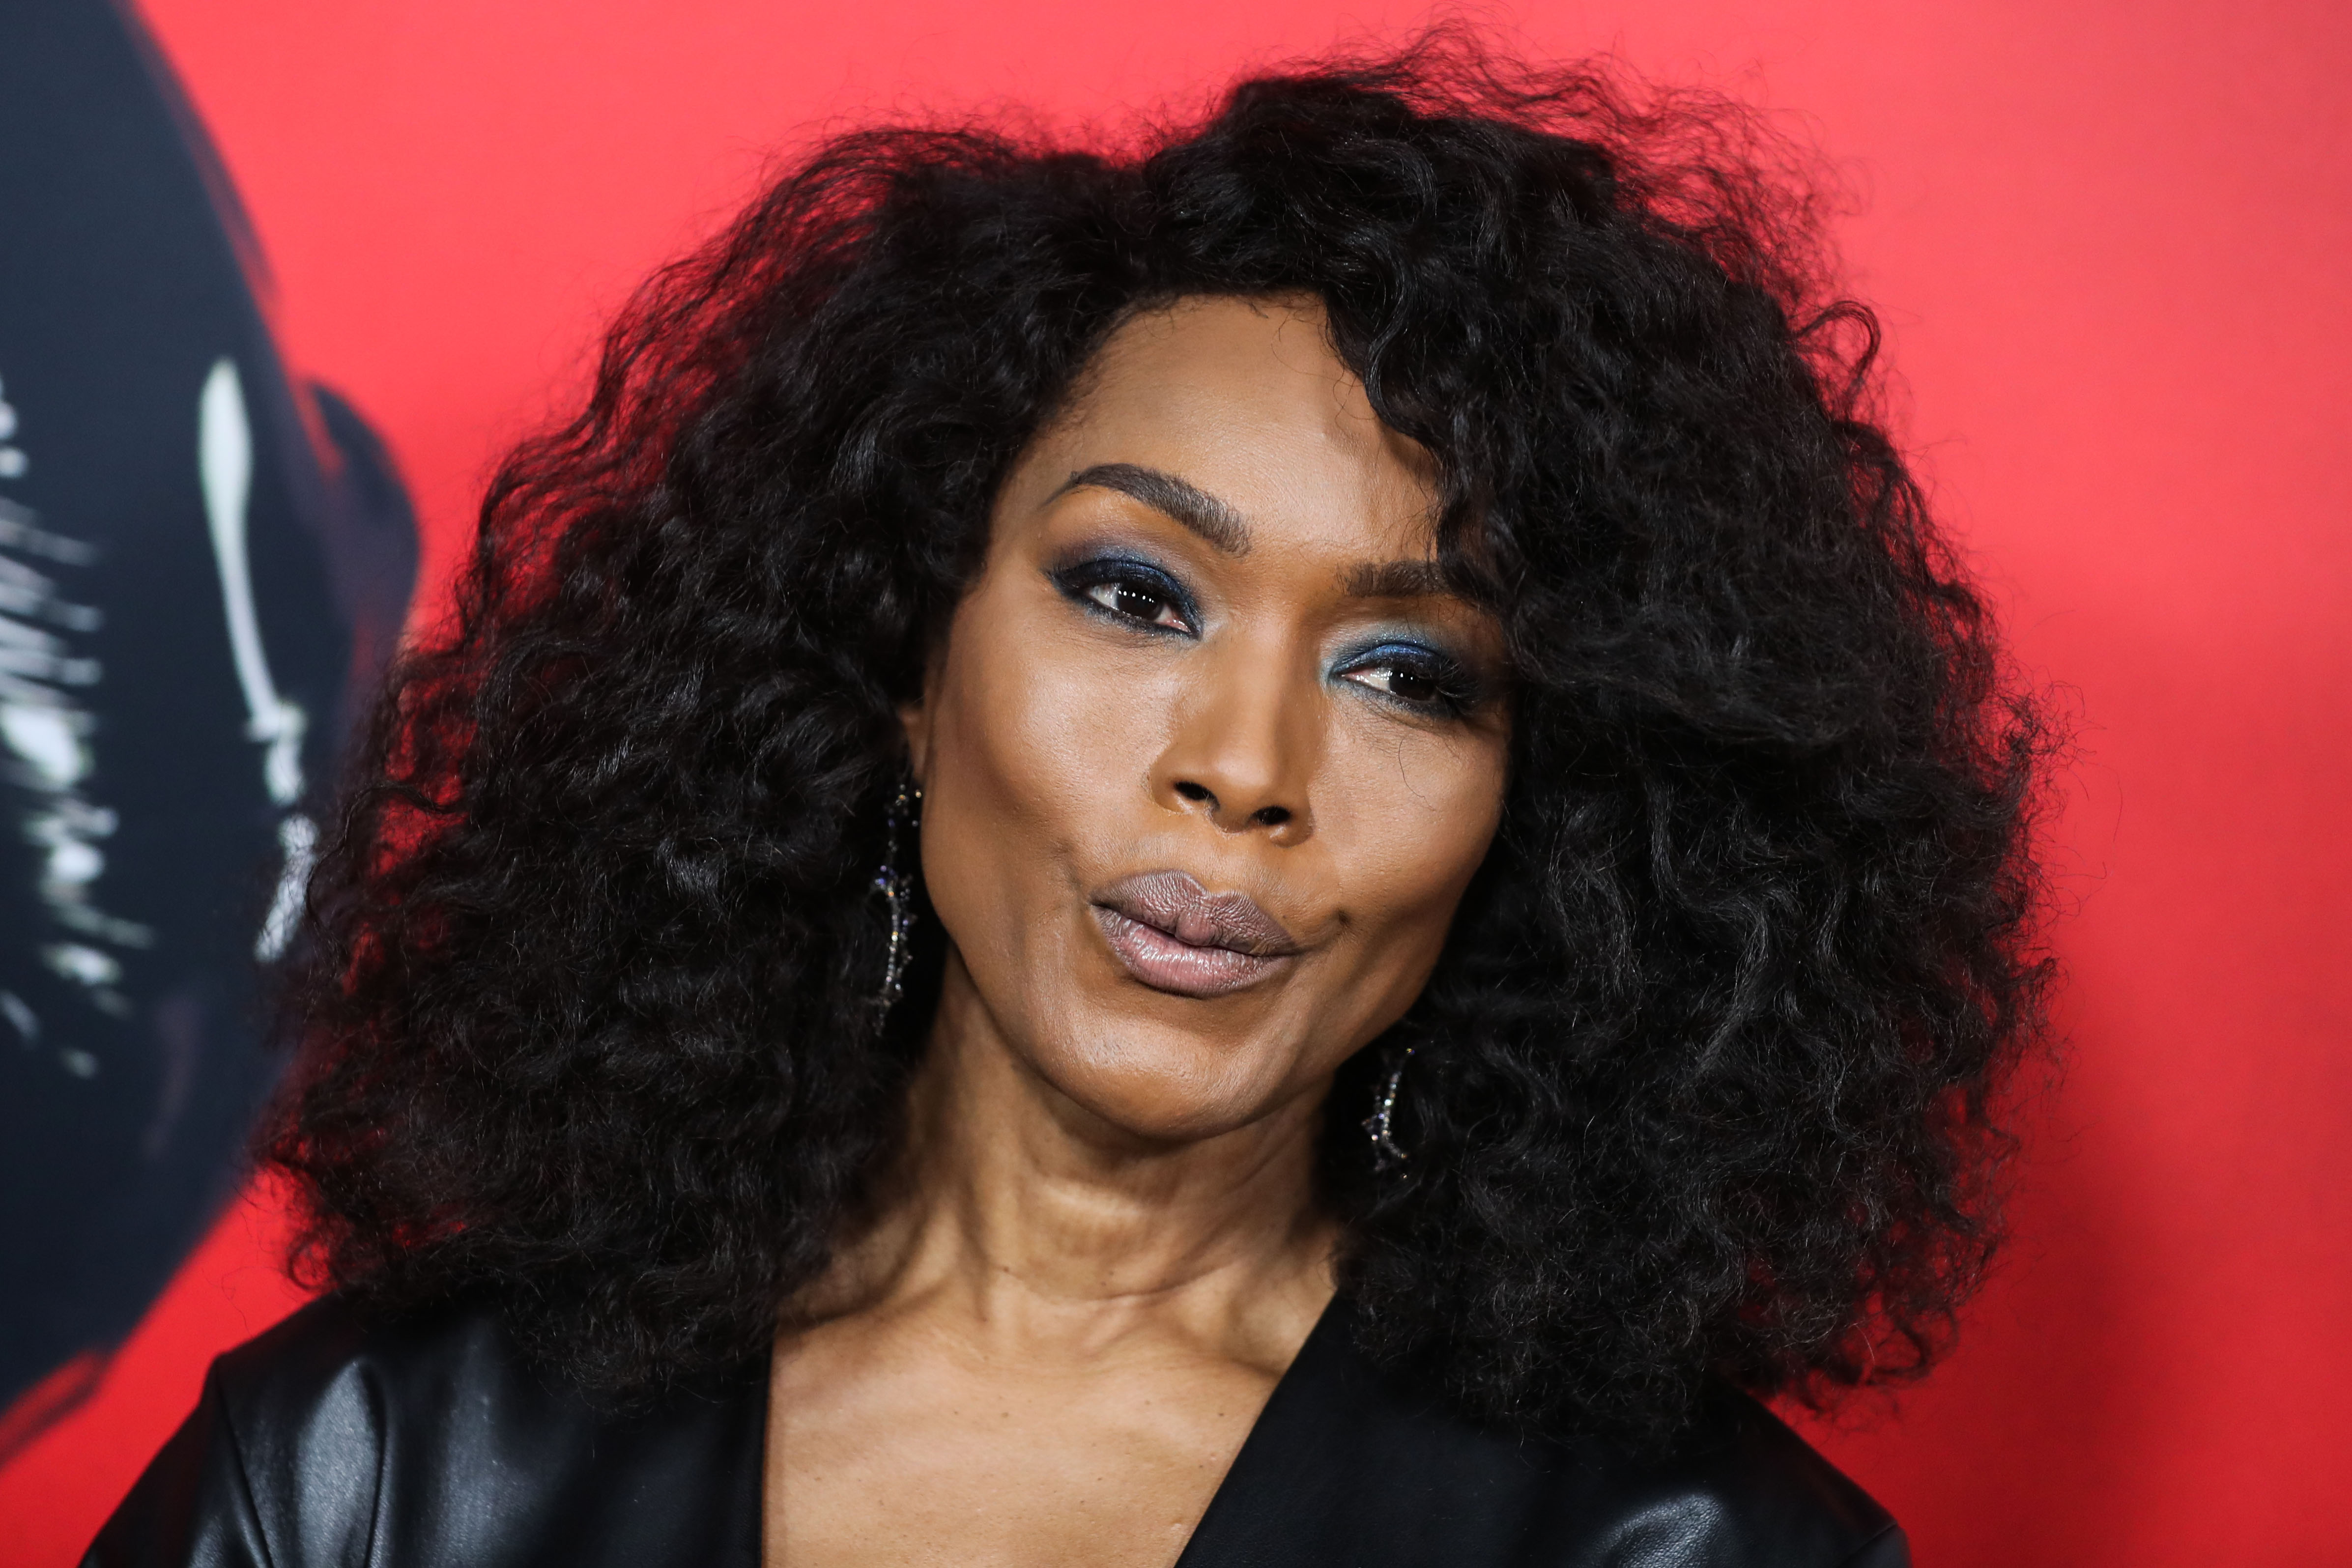 Actress Angela Bassett arrives at FX's 'American Horror Story' 100th Episode Celebration held at the Hollywood Forever Cemetery on October 26, 2019 in Hollywood, Los Angeles, California, United States.